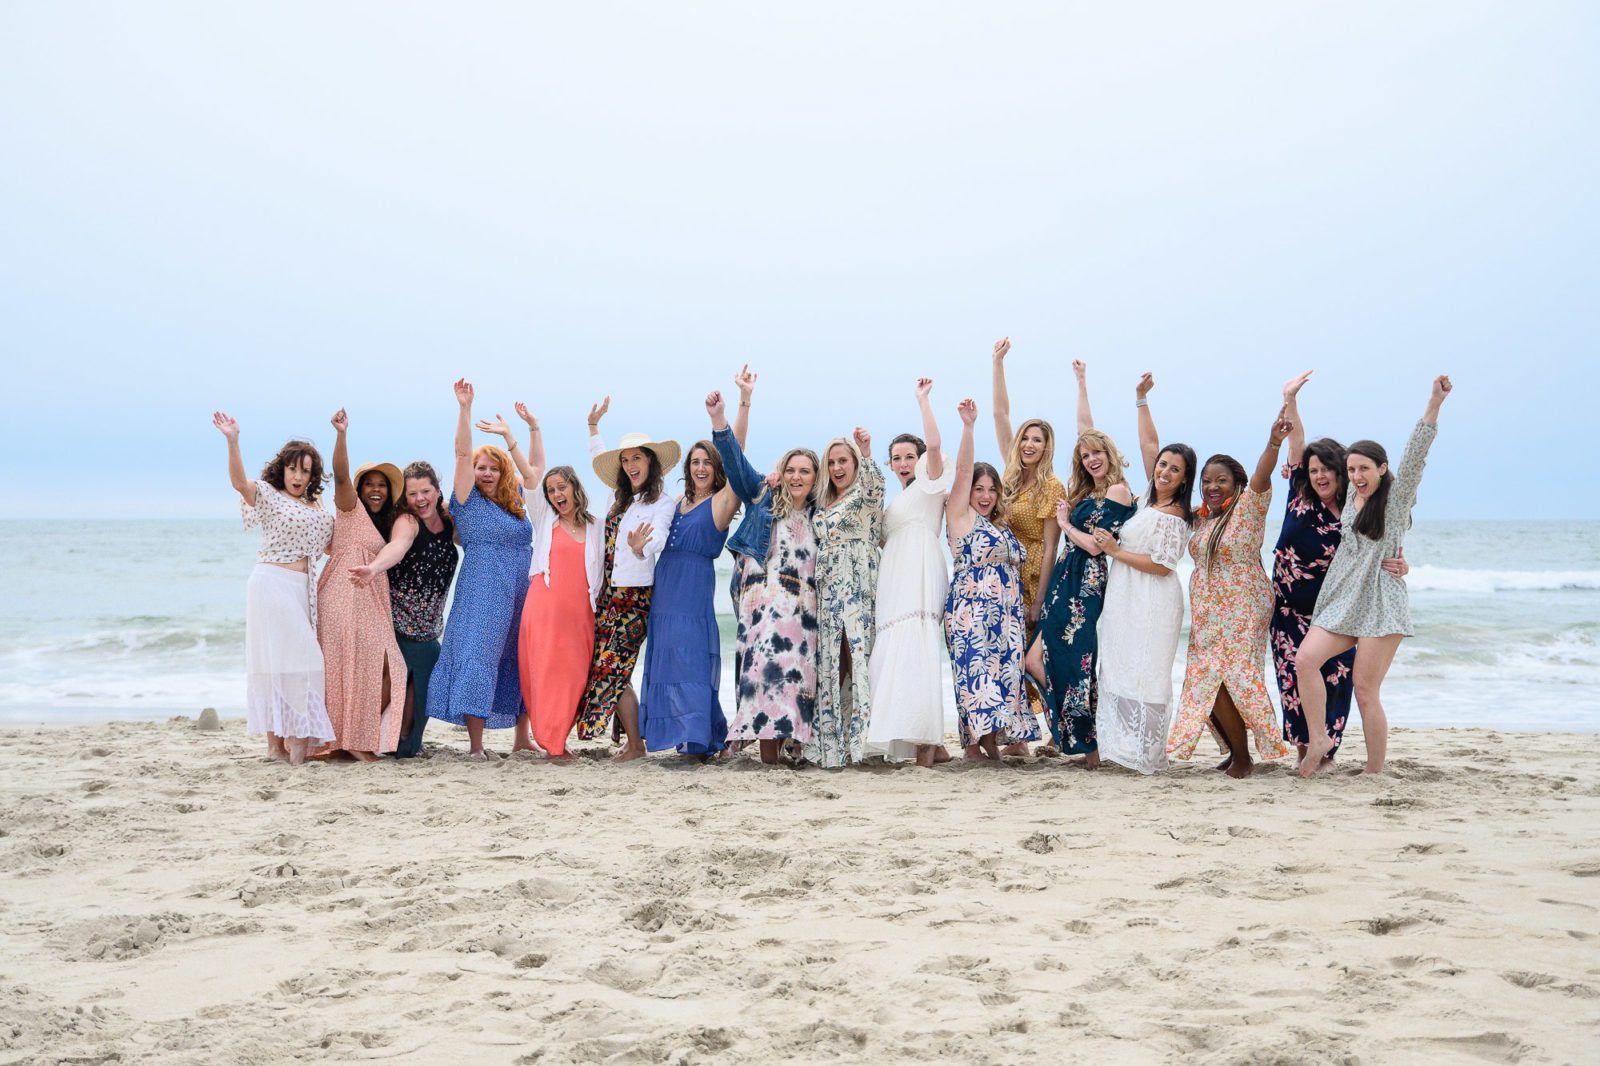 A long line of women on a beach in bright clothing with their arms raised in celebration for Denver Commercial Photographers.